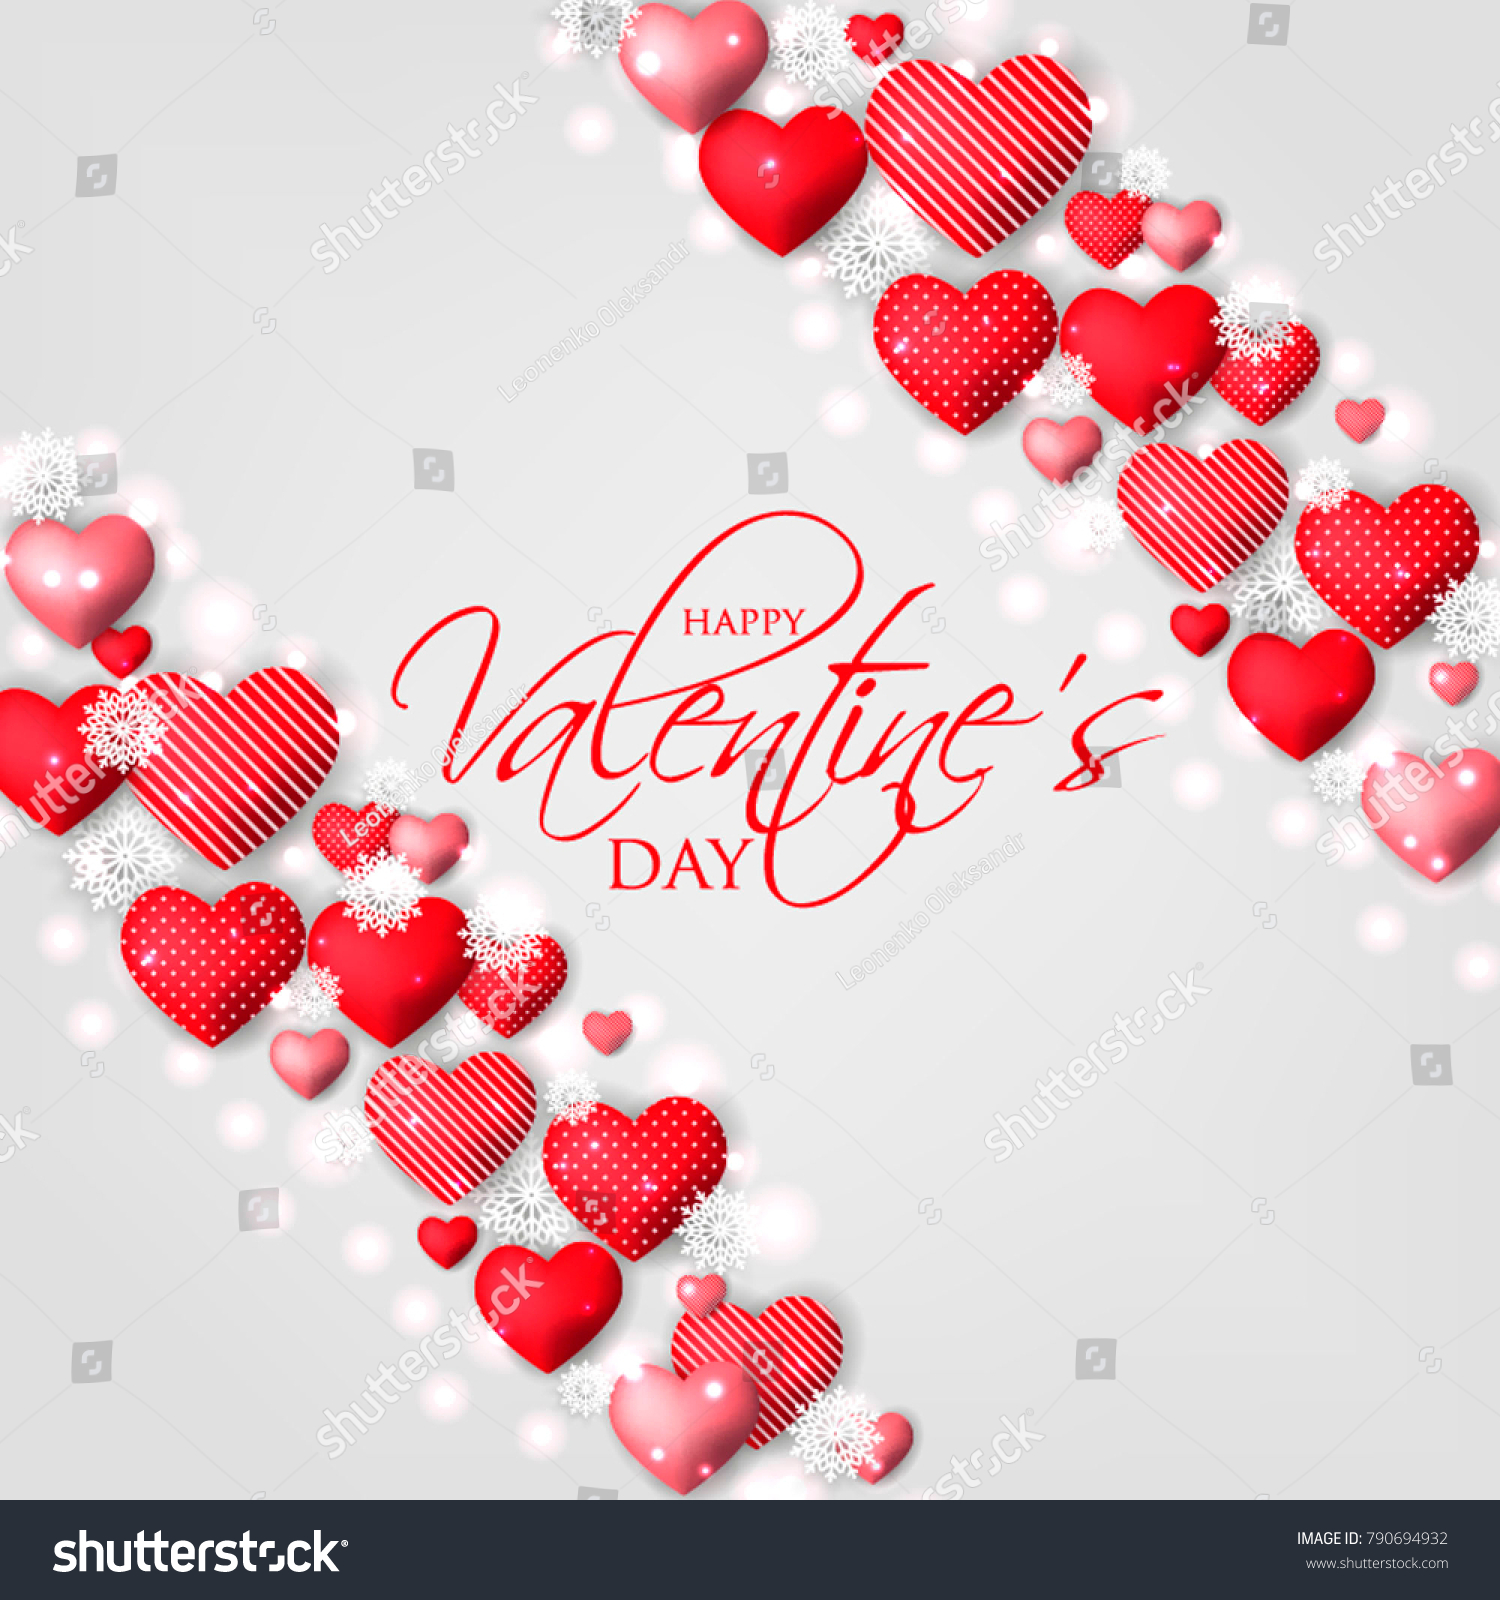 Happy Valentines day card Invitation. Wedding card red hearts background #790694932